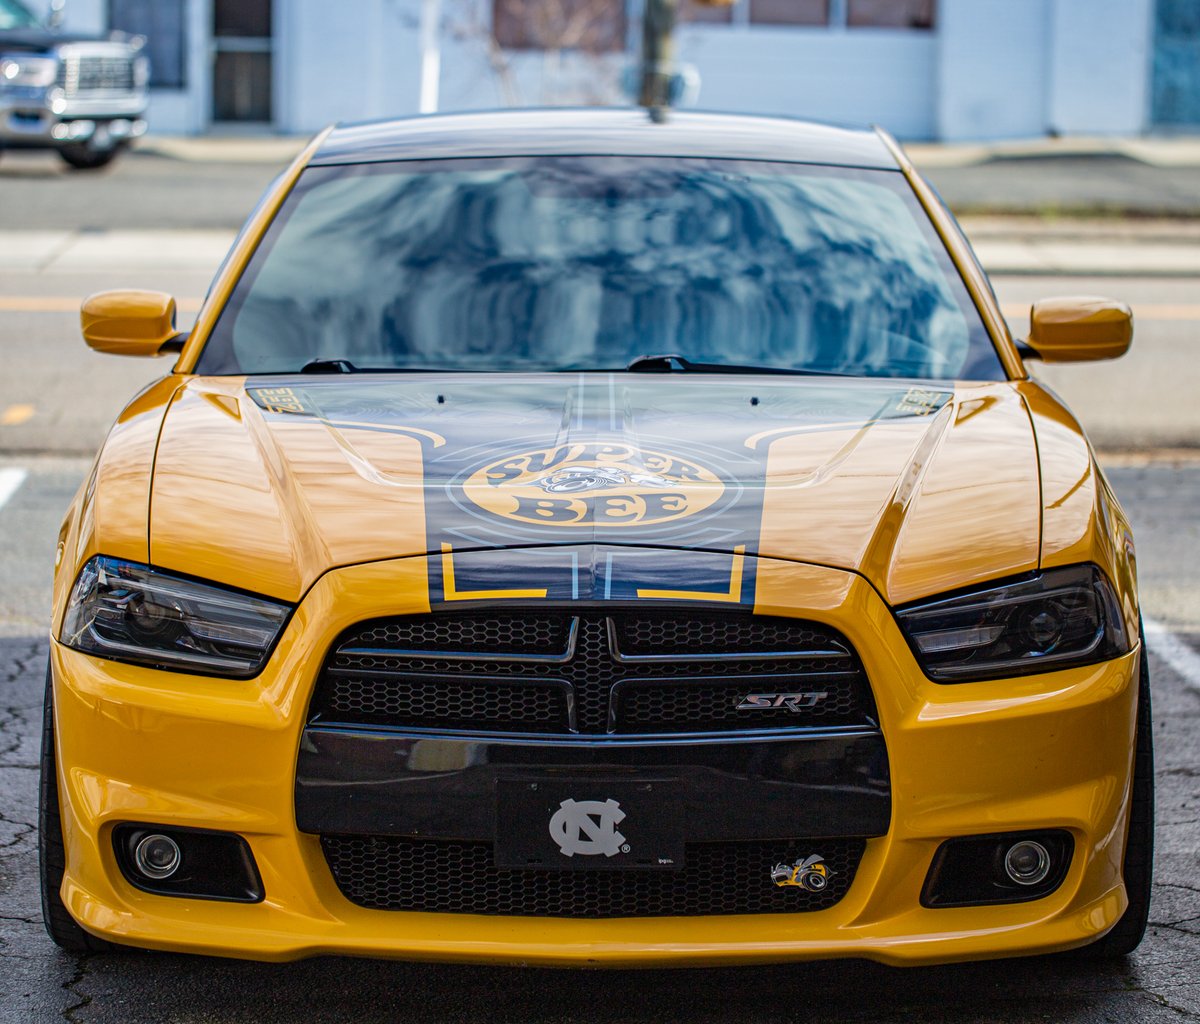 Stand out on the road and attract more customers with branded vehicle wraps. Click to start your order bit.ly/3JxguvO - #vehiclewraps #vehiclewrap #vinylwrap #carwrap #corporatewrap